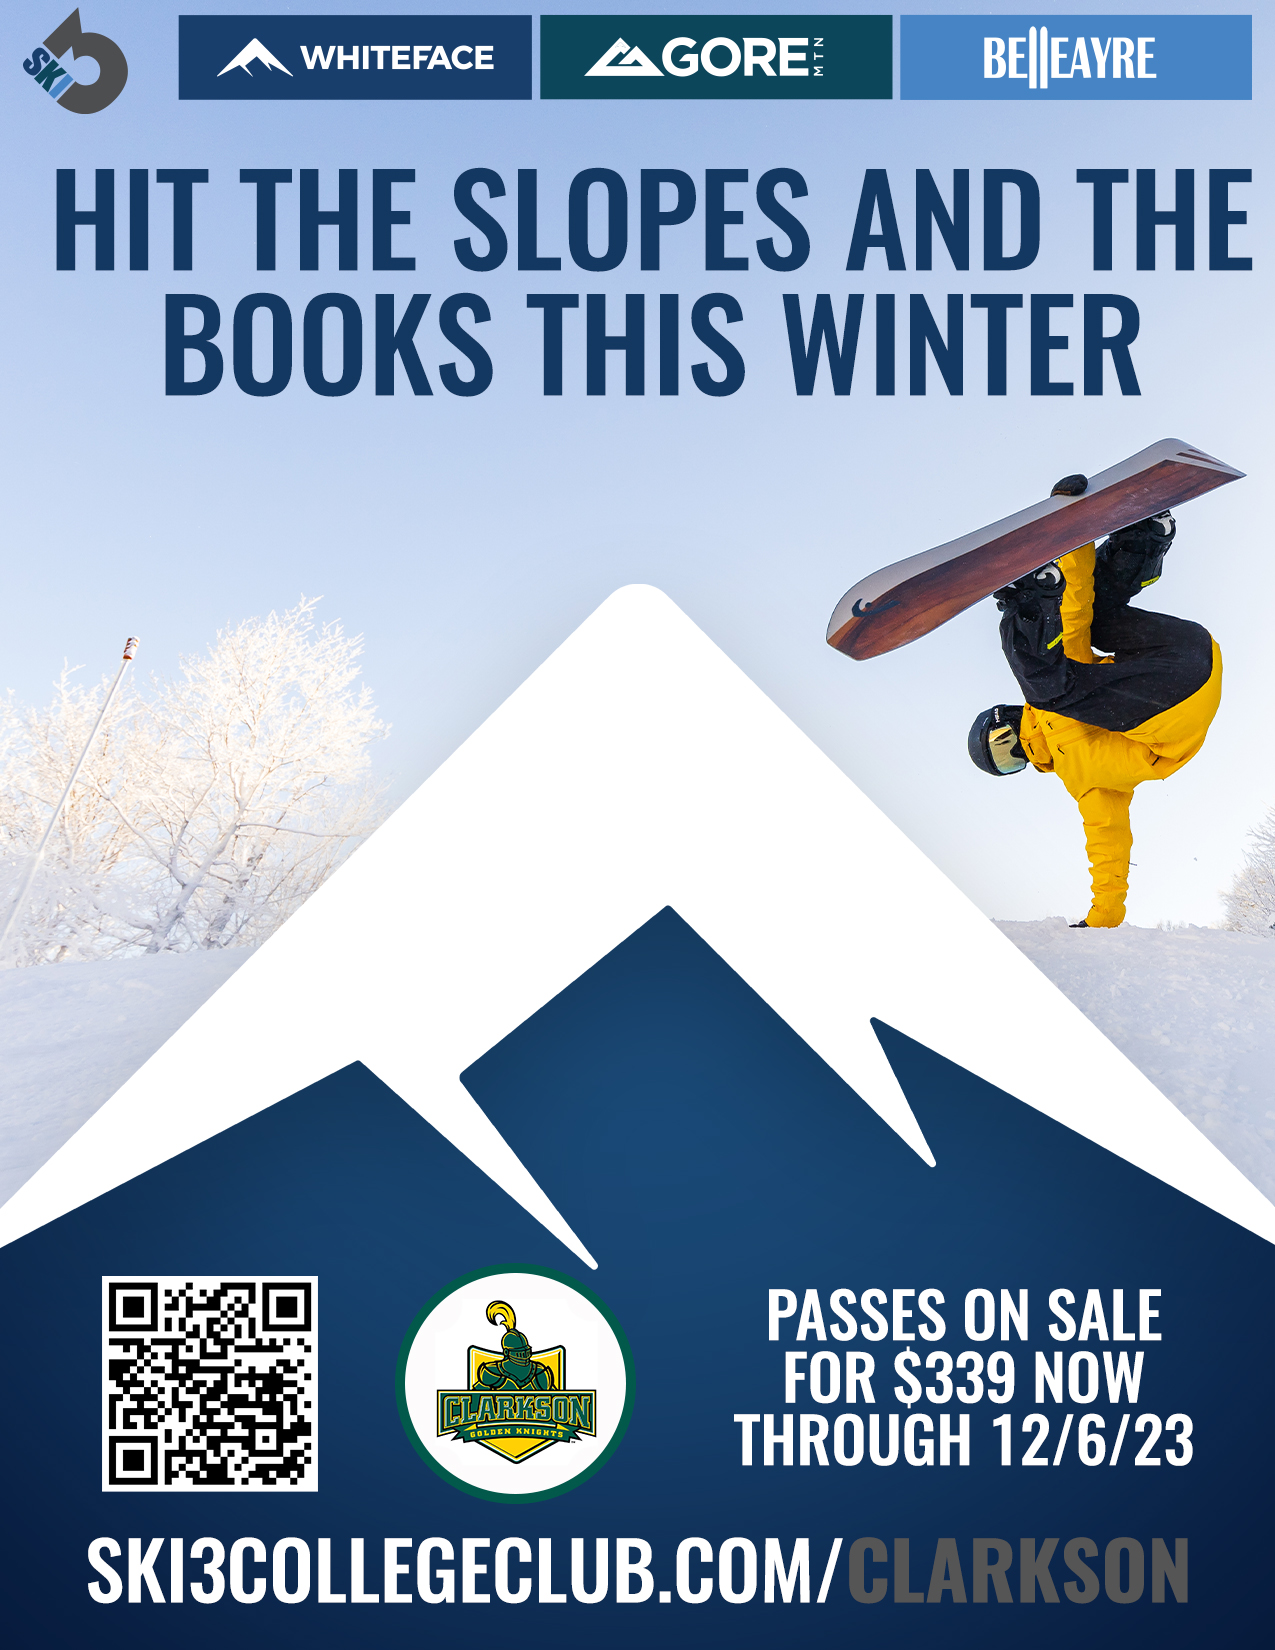 The flyer shows a snowboarder and logos for Whiteface, Gore, and Belleayre Mountains, along with the Ski3 and Clarkson University logo. The motto "Hit the slopes and books this winter" is included as well as a QR code for the website where you can buy the pass: ski3collegeclub.com/clarkson. Passes on sale now for $339 through 12/6.